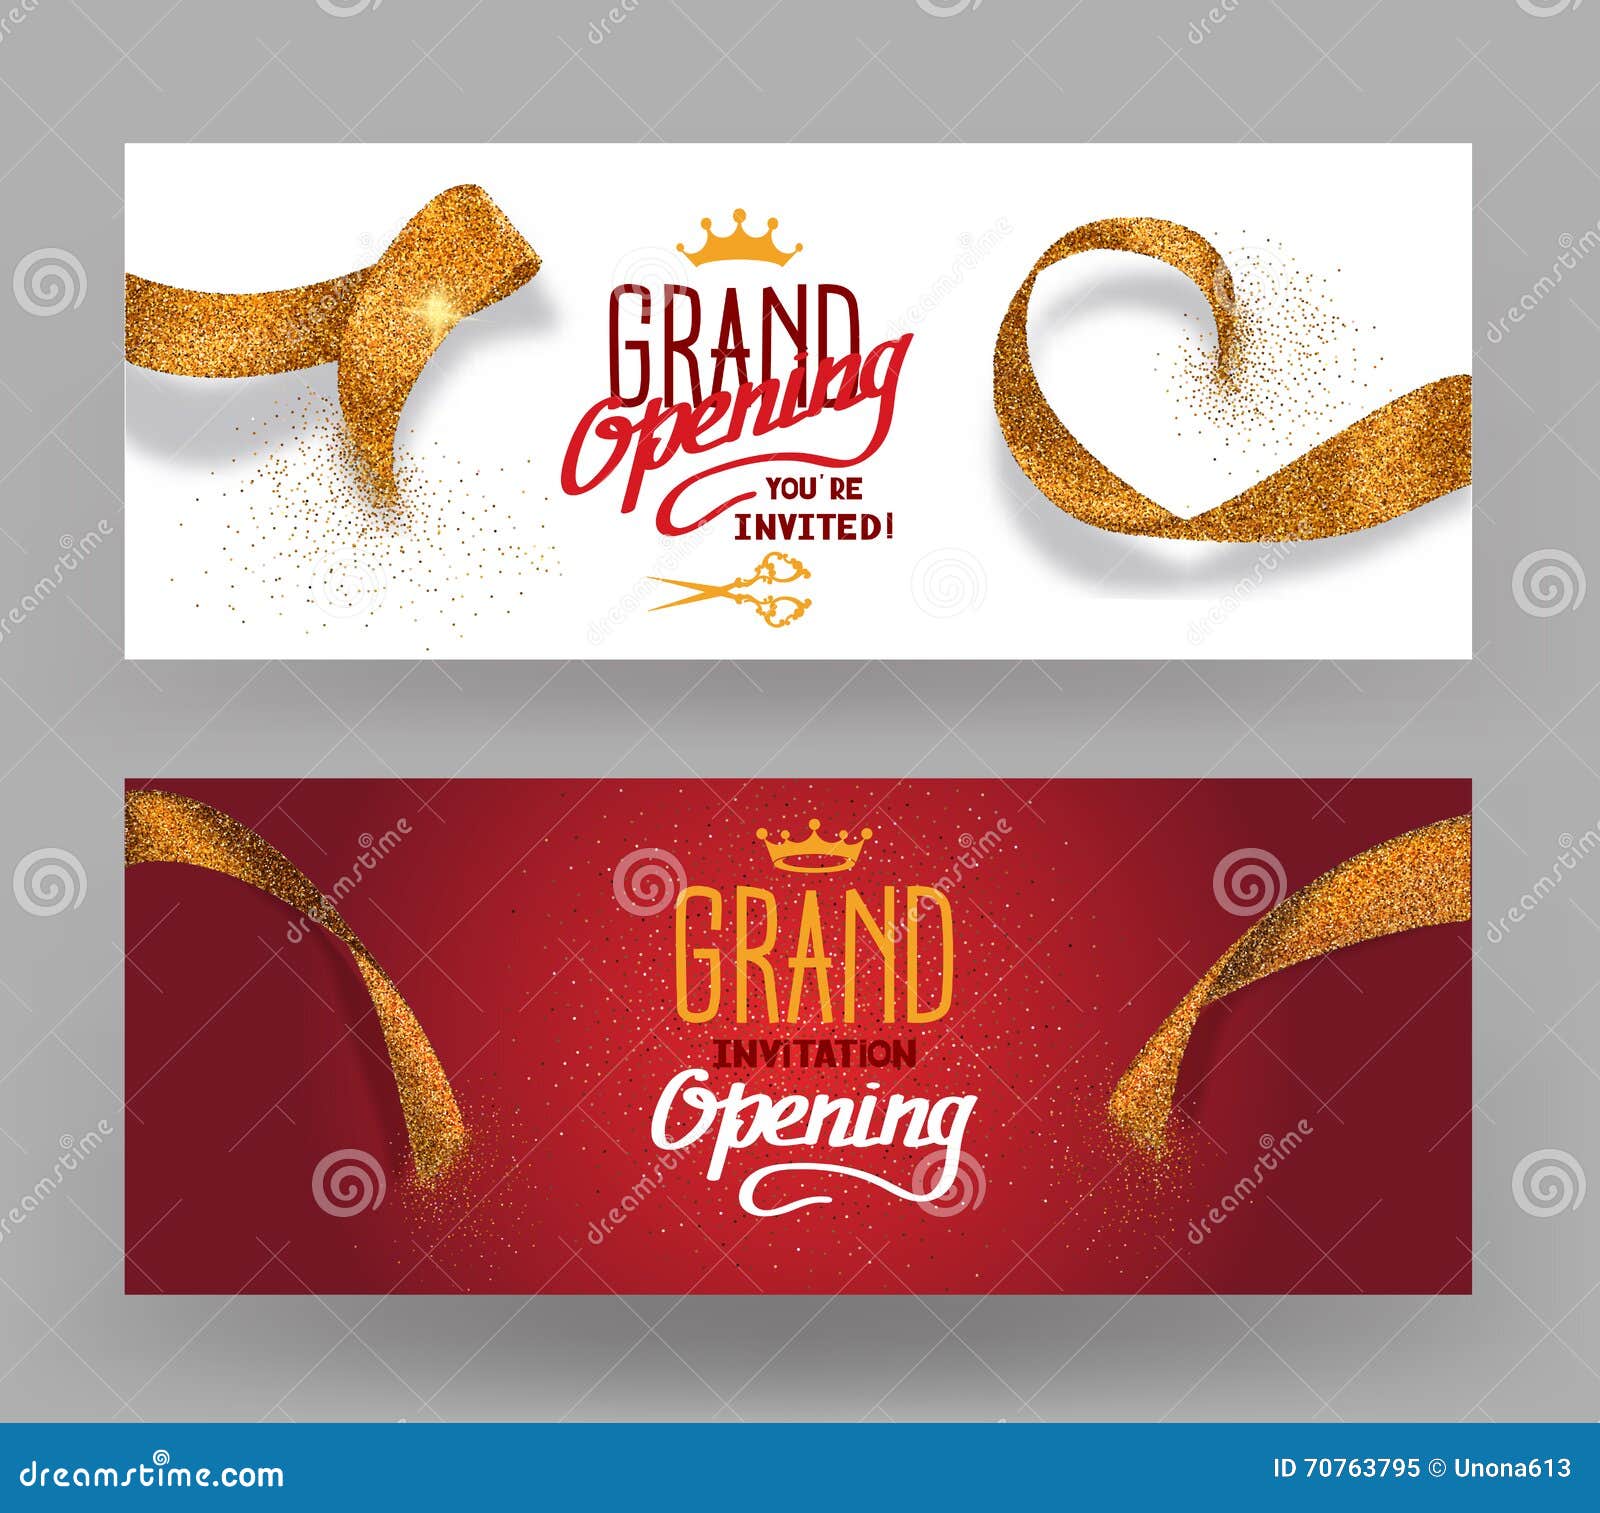 grand opening horisontal banners with abstract gold cut ribbons